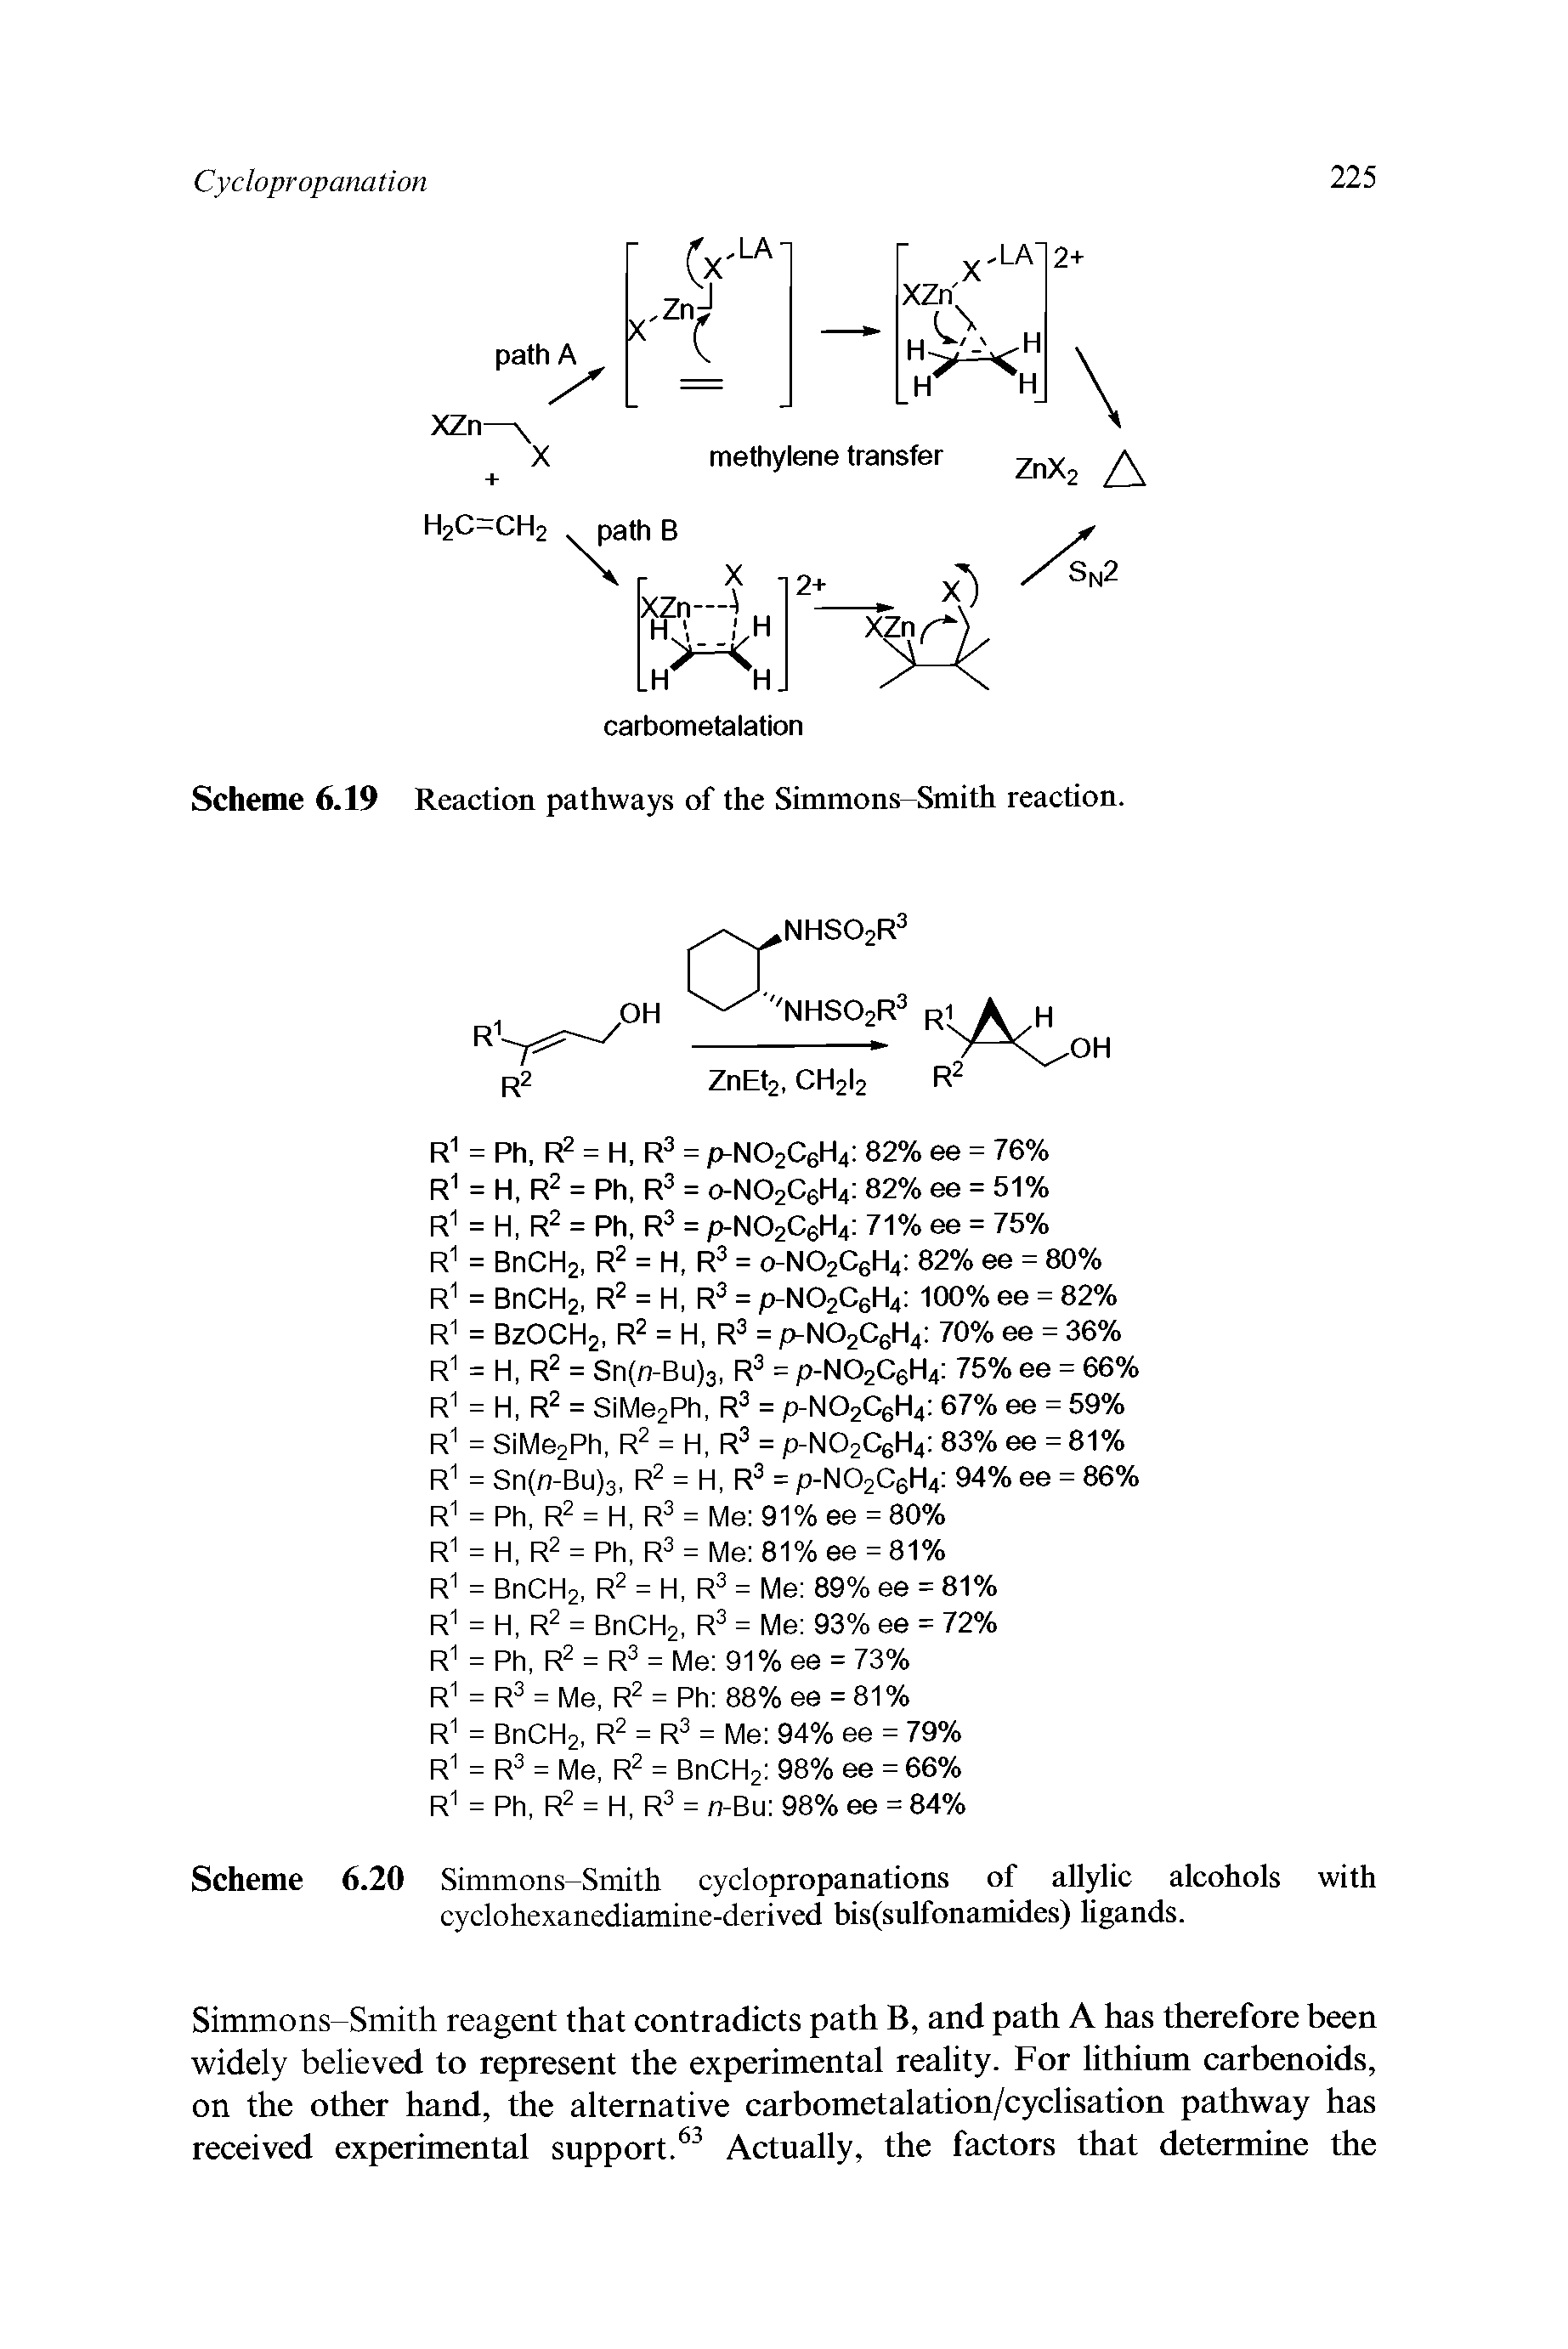 Scheme 6.20 Simmons-Smith cyclopropanations of allylic alcohols with cyclohexanediamine-derived bis(snlfonamides) ligands.